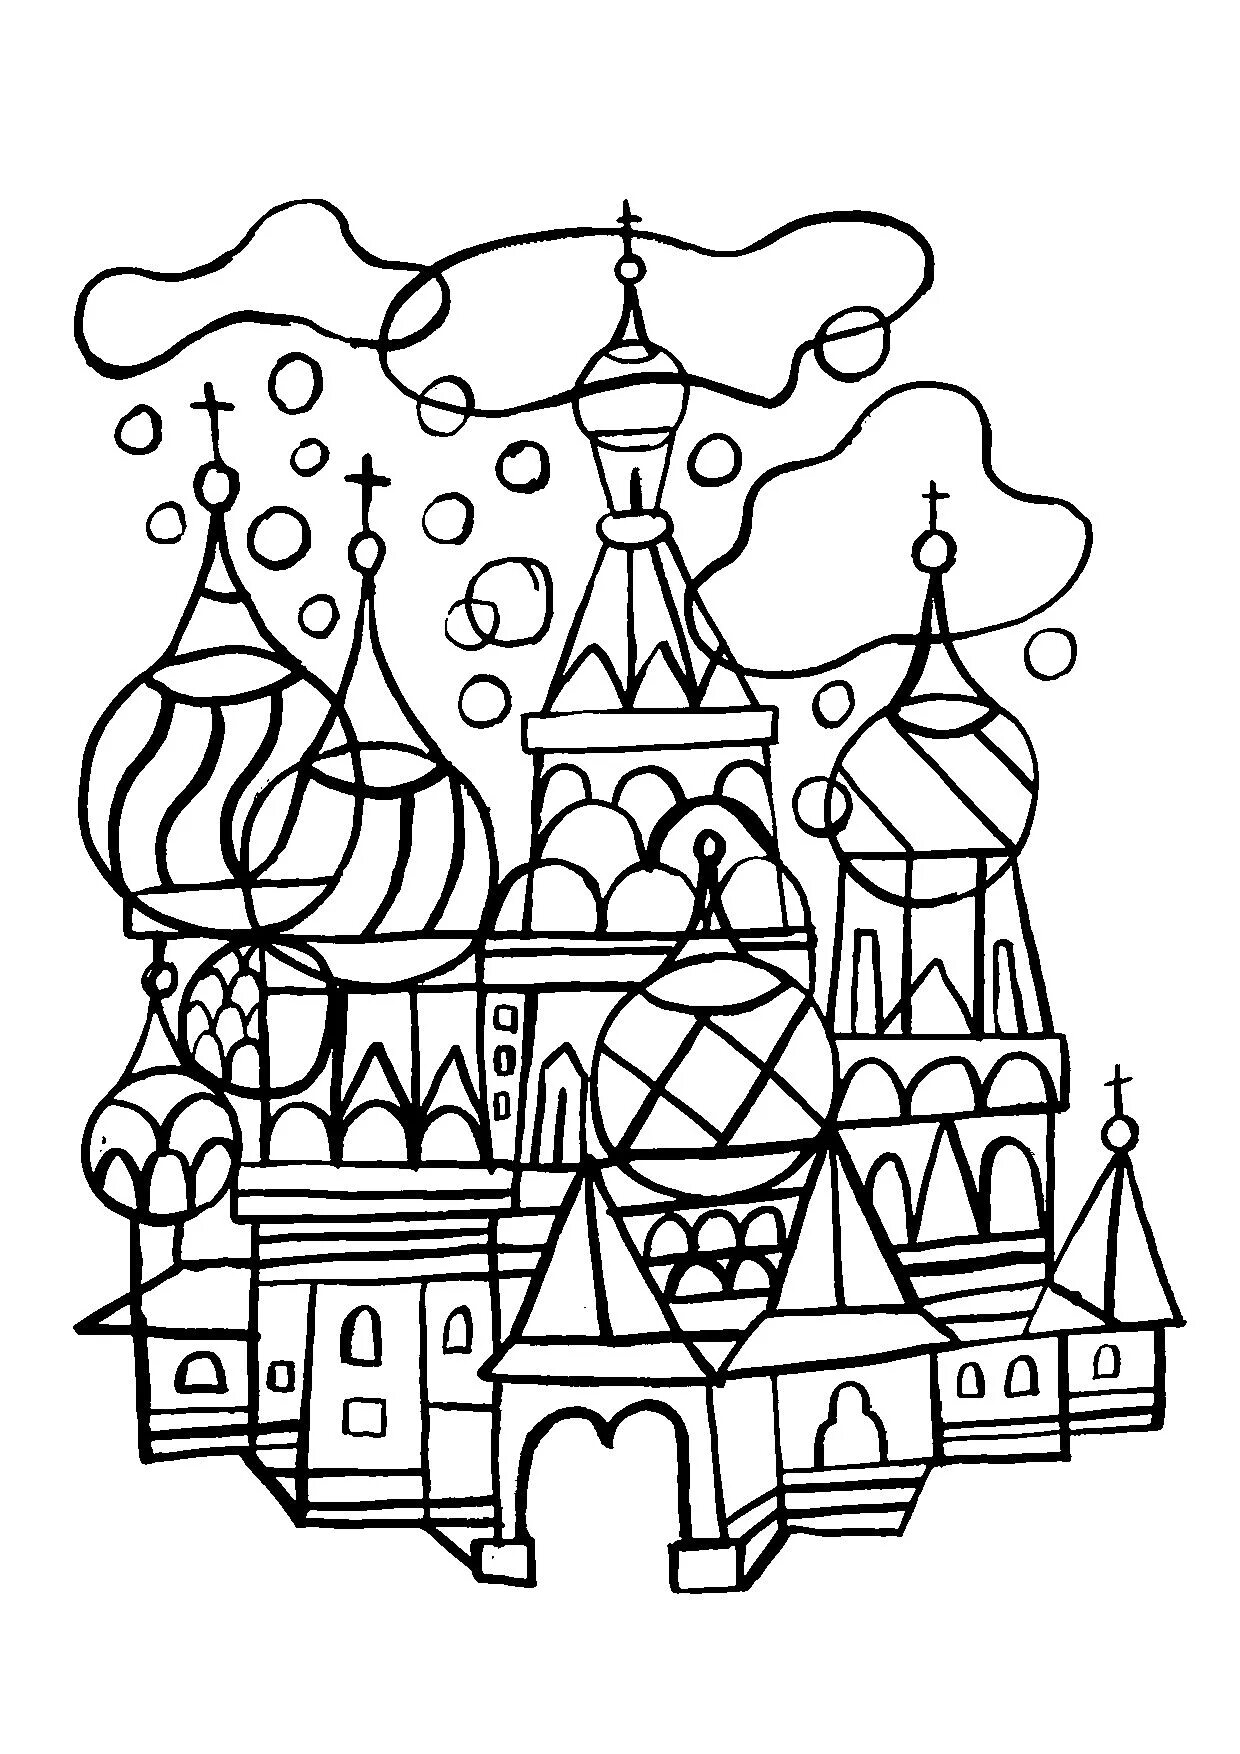 St. Basil's Cathedral for children #12